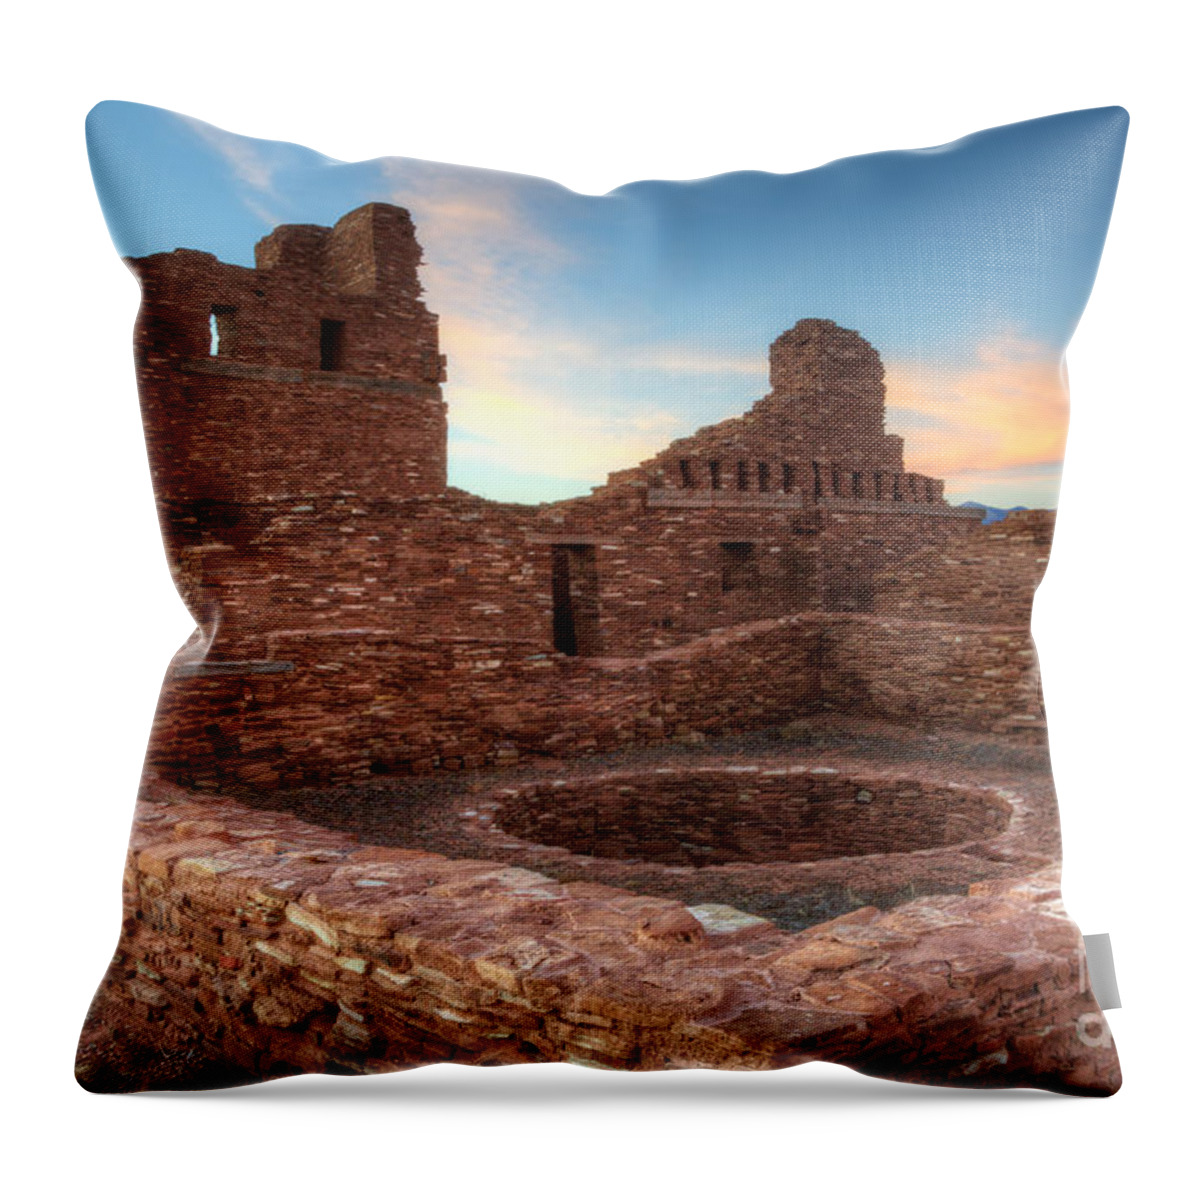 Salinas Pueblo Mission Ruins Throw Pillow featuring the photograph Salinas Pueblo Mission Abo Ruin by Bob Christopher